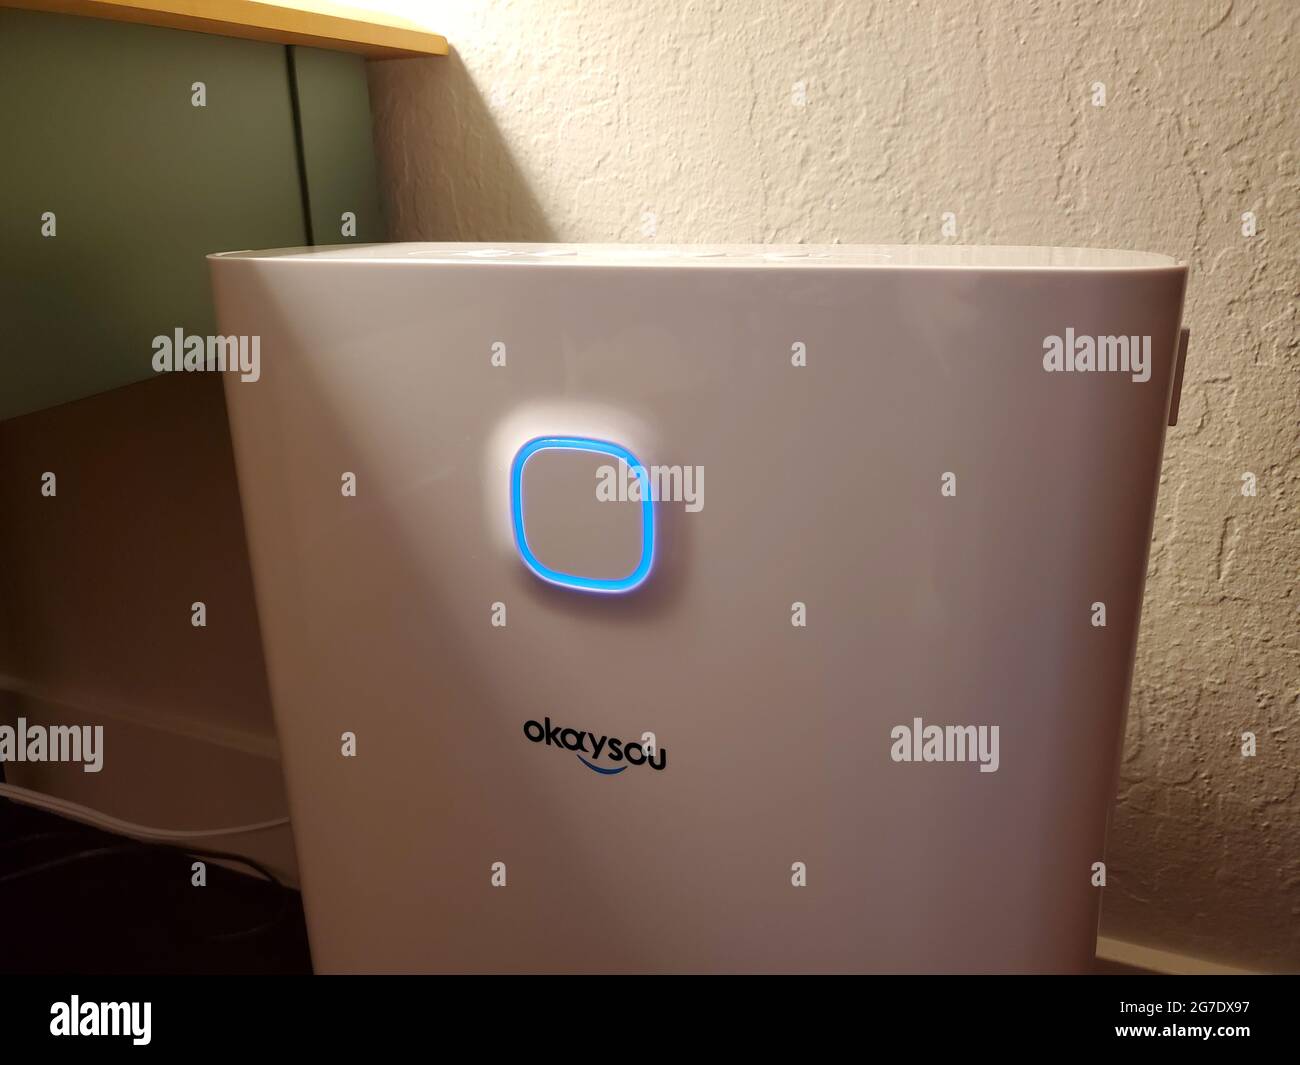 Okaysou Airmax 10L pro smart HEPA 13 air purifier in a smart home in Lafayette, California, May 19, 2021. () Stock Photo